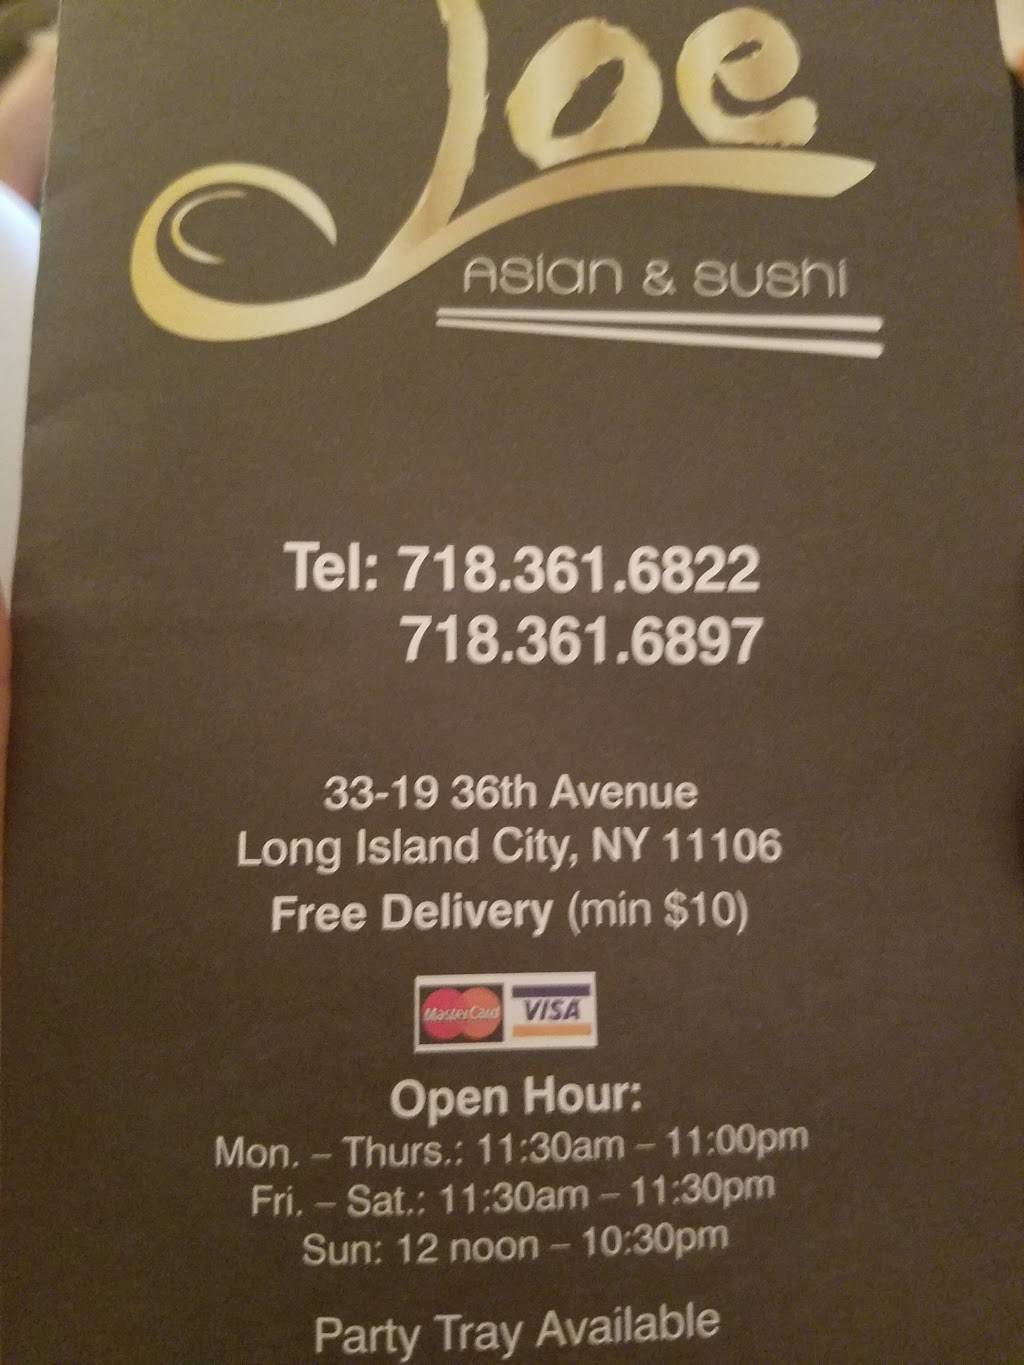 Joe Asian & Sushi | restaurant | 33-19 36th Ave, Queens, NY 11106, USA | 7183616822 OR +1 718-361-6822